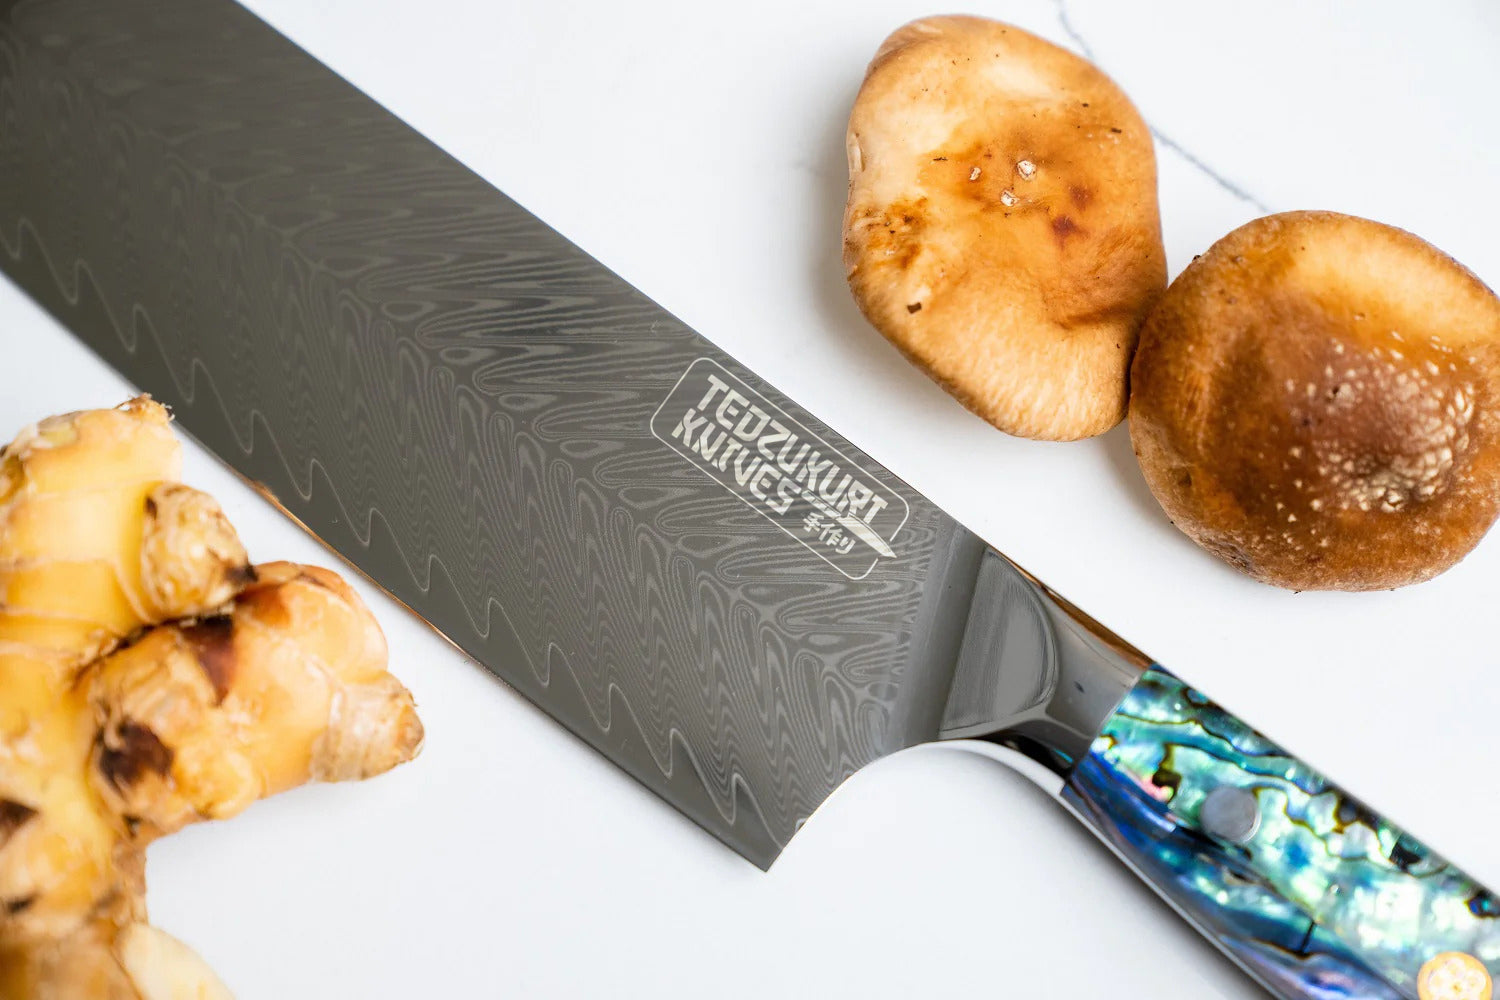 Thyme & Table 8 Damascus Chef Knife